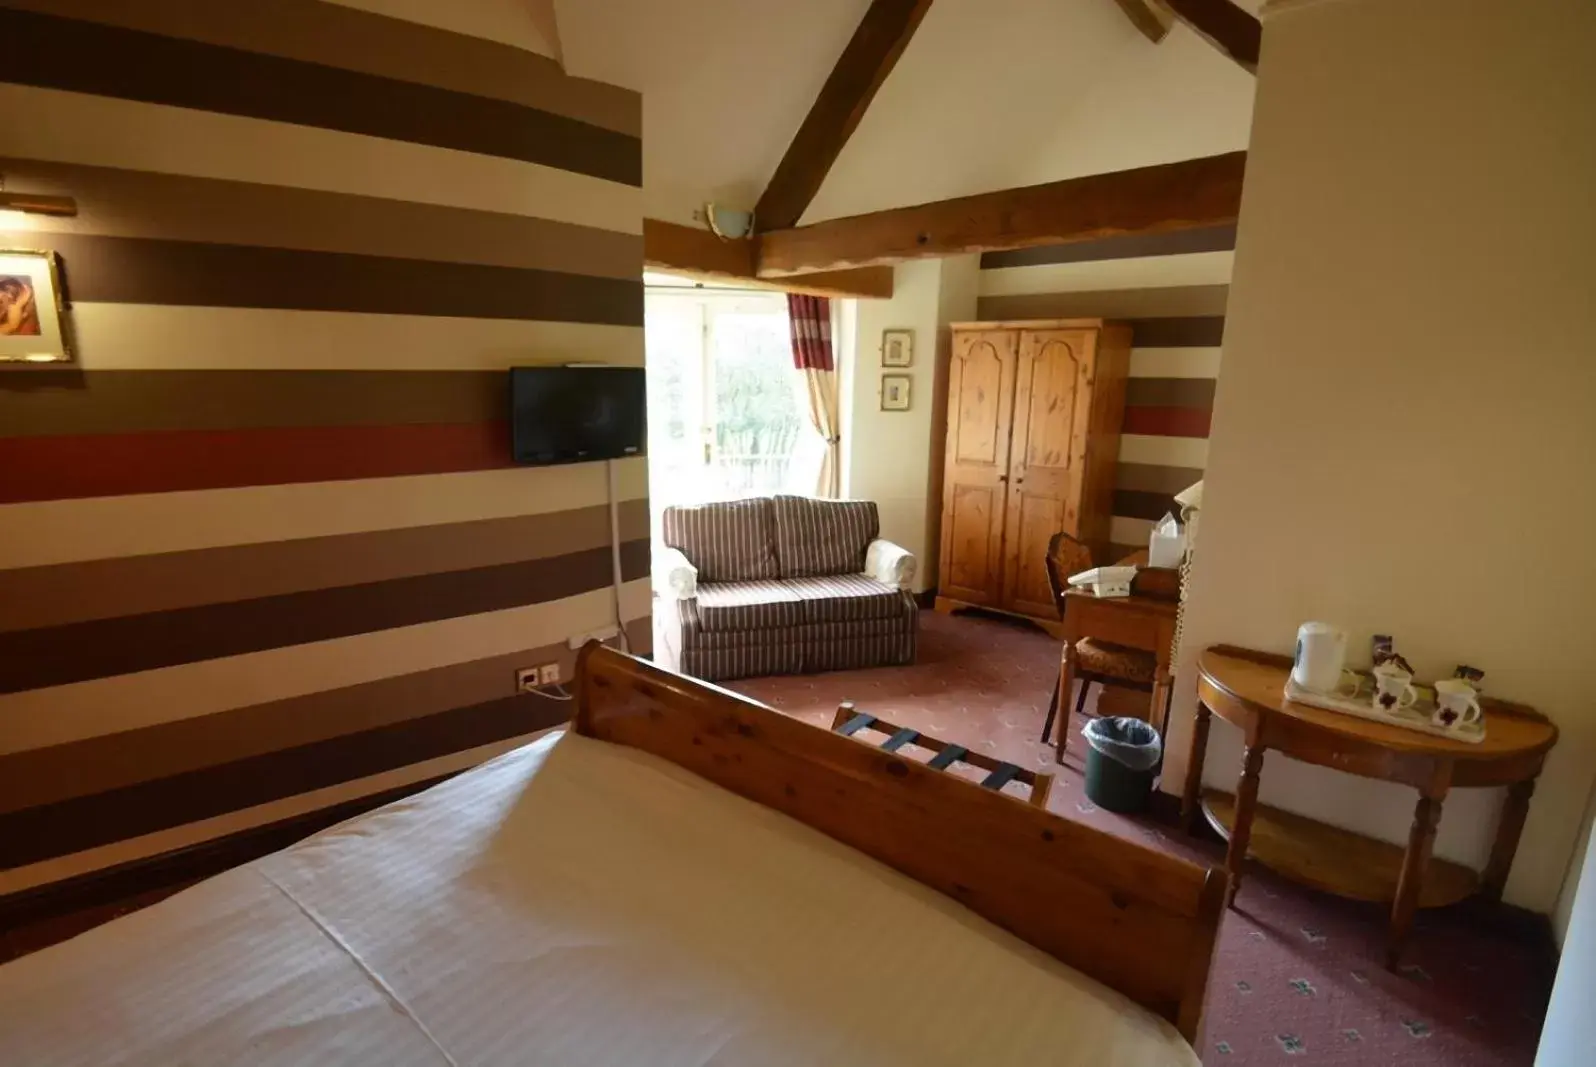 Bedroom in The Ennerdale Country House Hotel ‘A Bespoke Hotel’